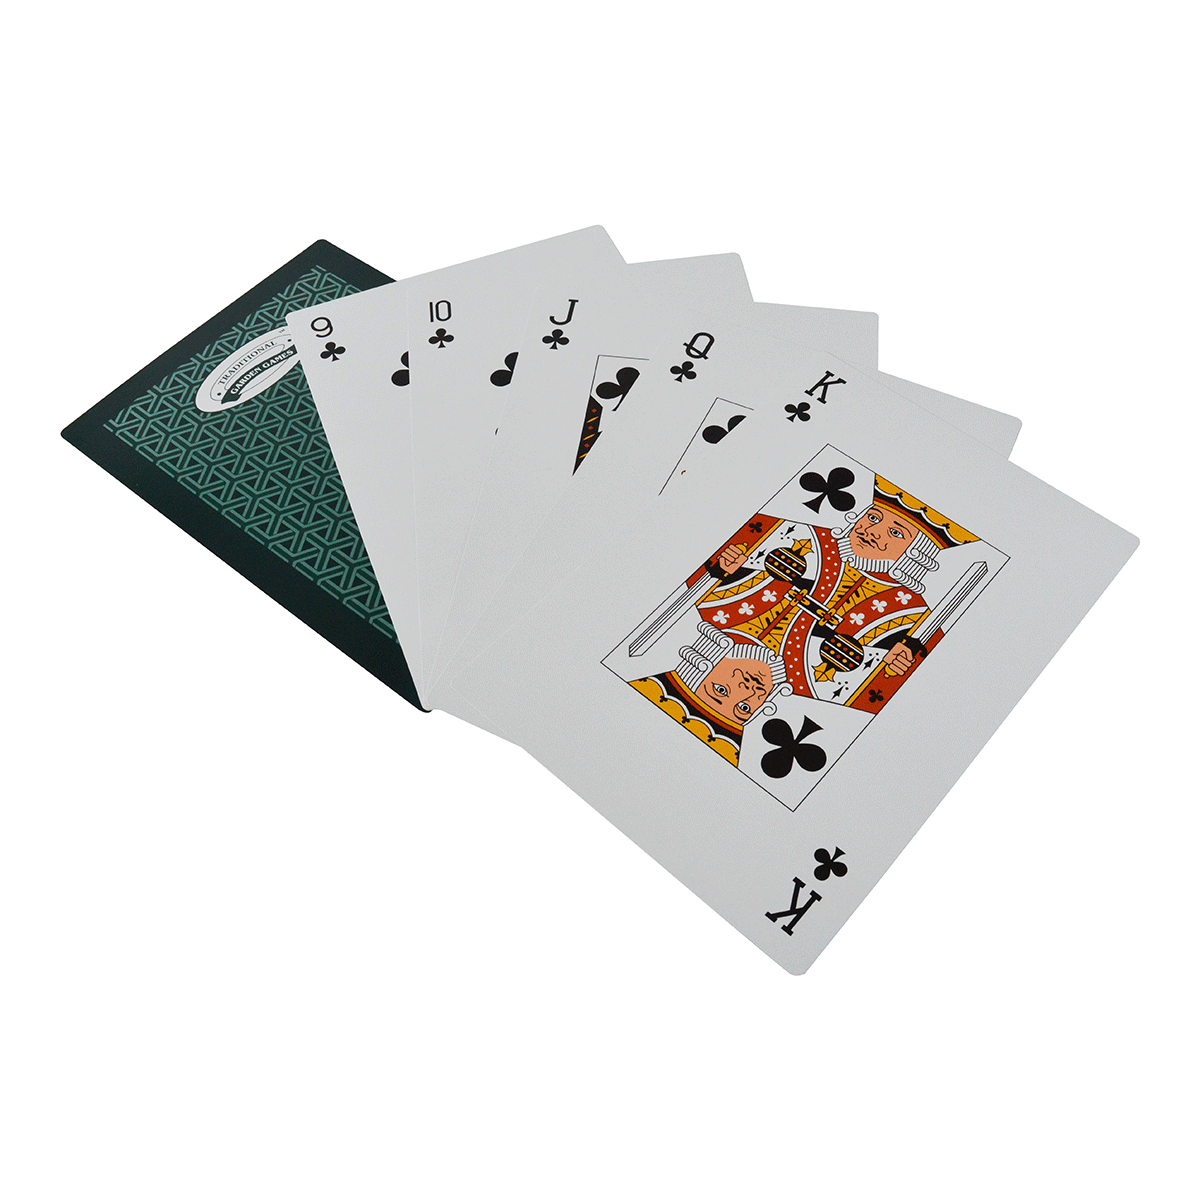 trTraditional Garden Games NEW XXL Giant Playing Cards